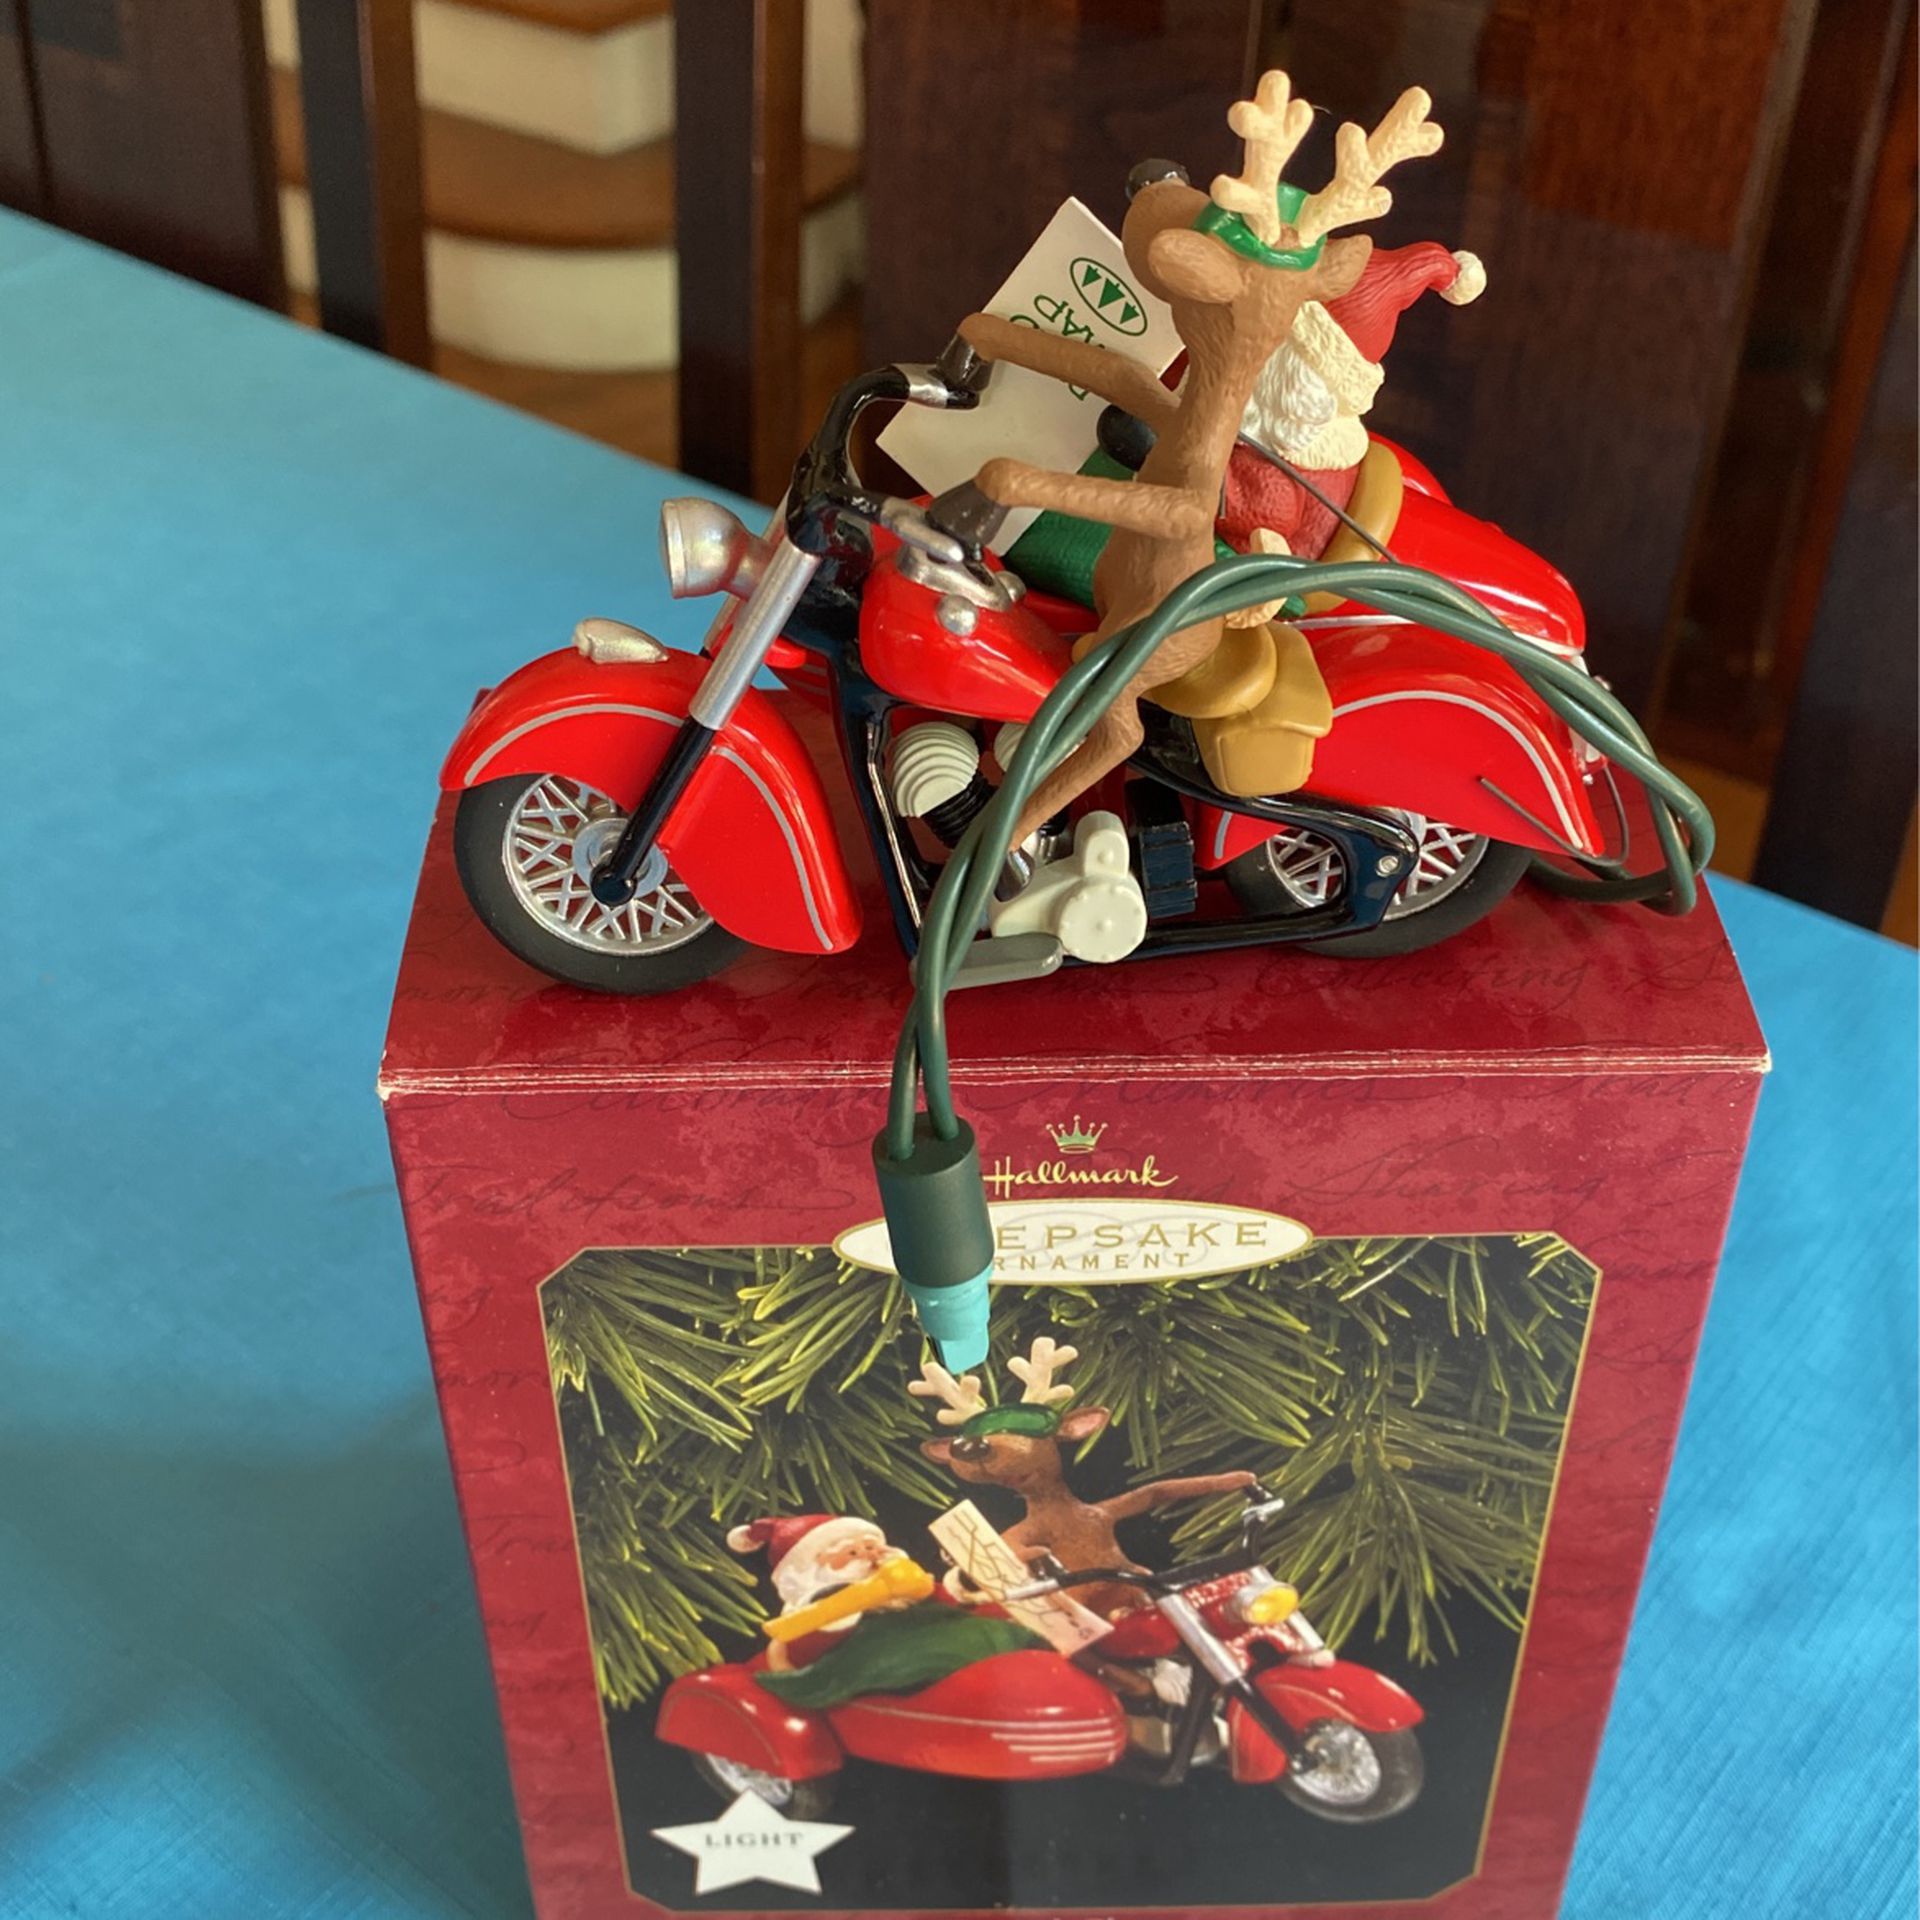 Hallmark keepsake vintage collectible Christmas tree ornament motorcycle charms magic would like like new in the original box with paperwork andraft a